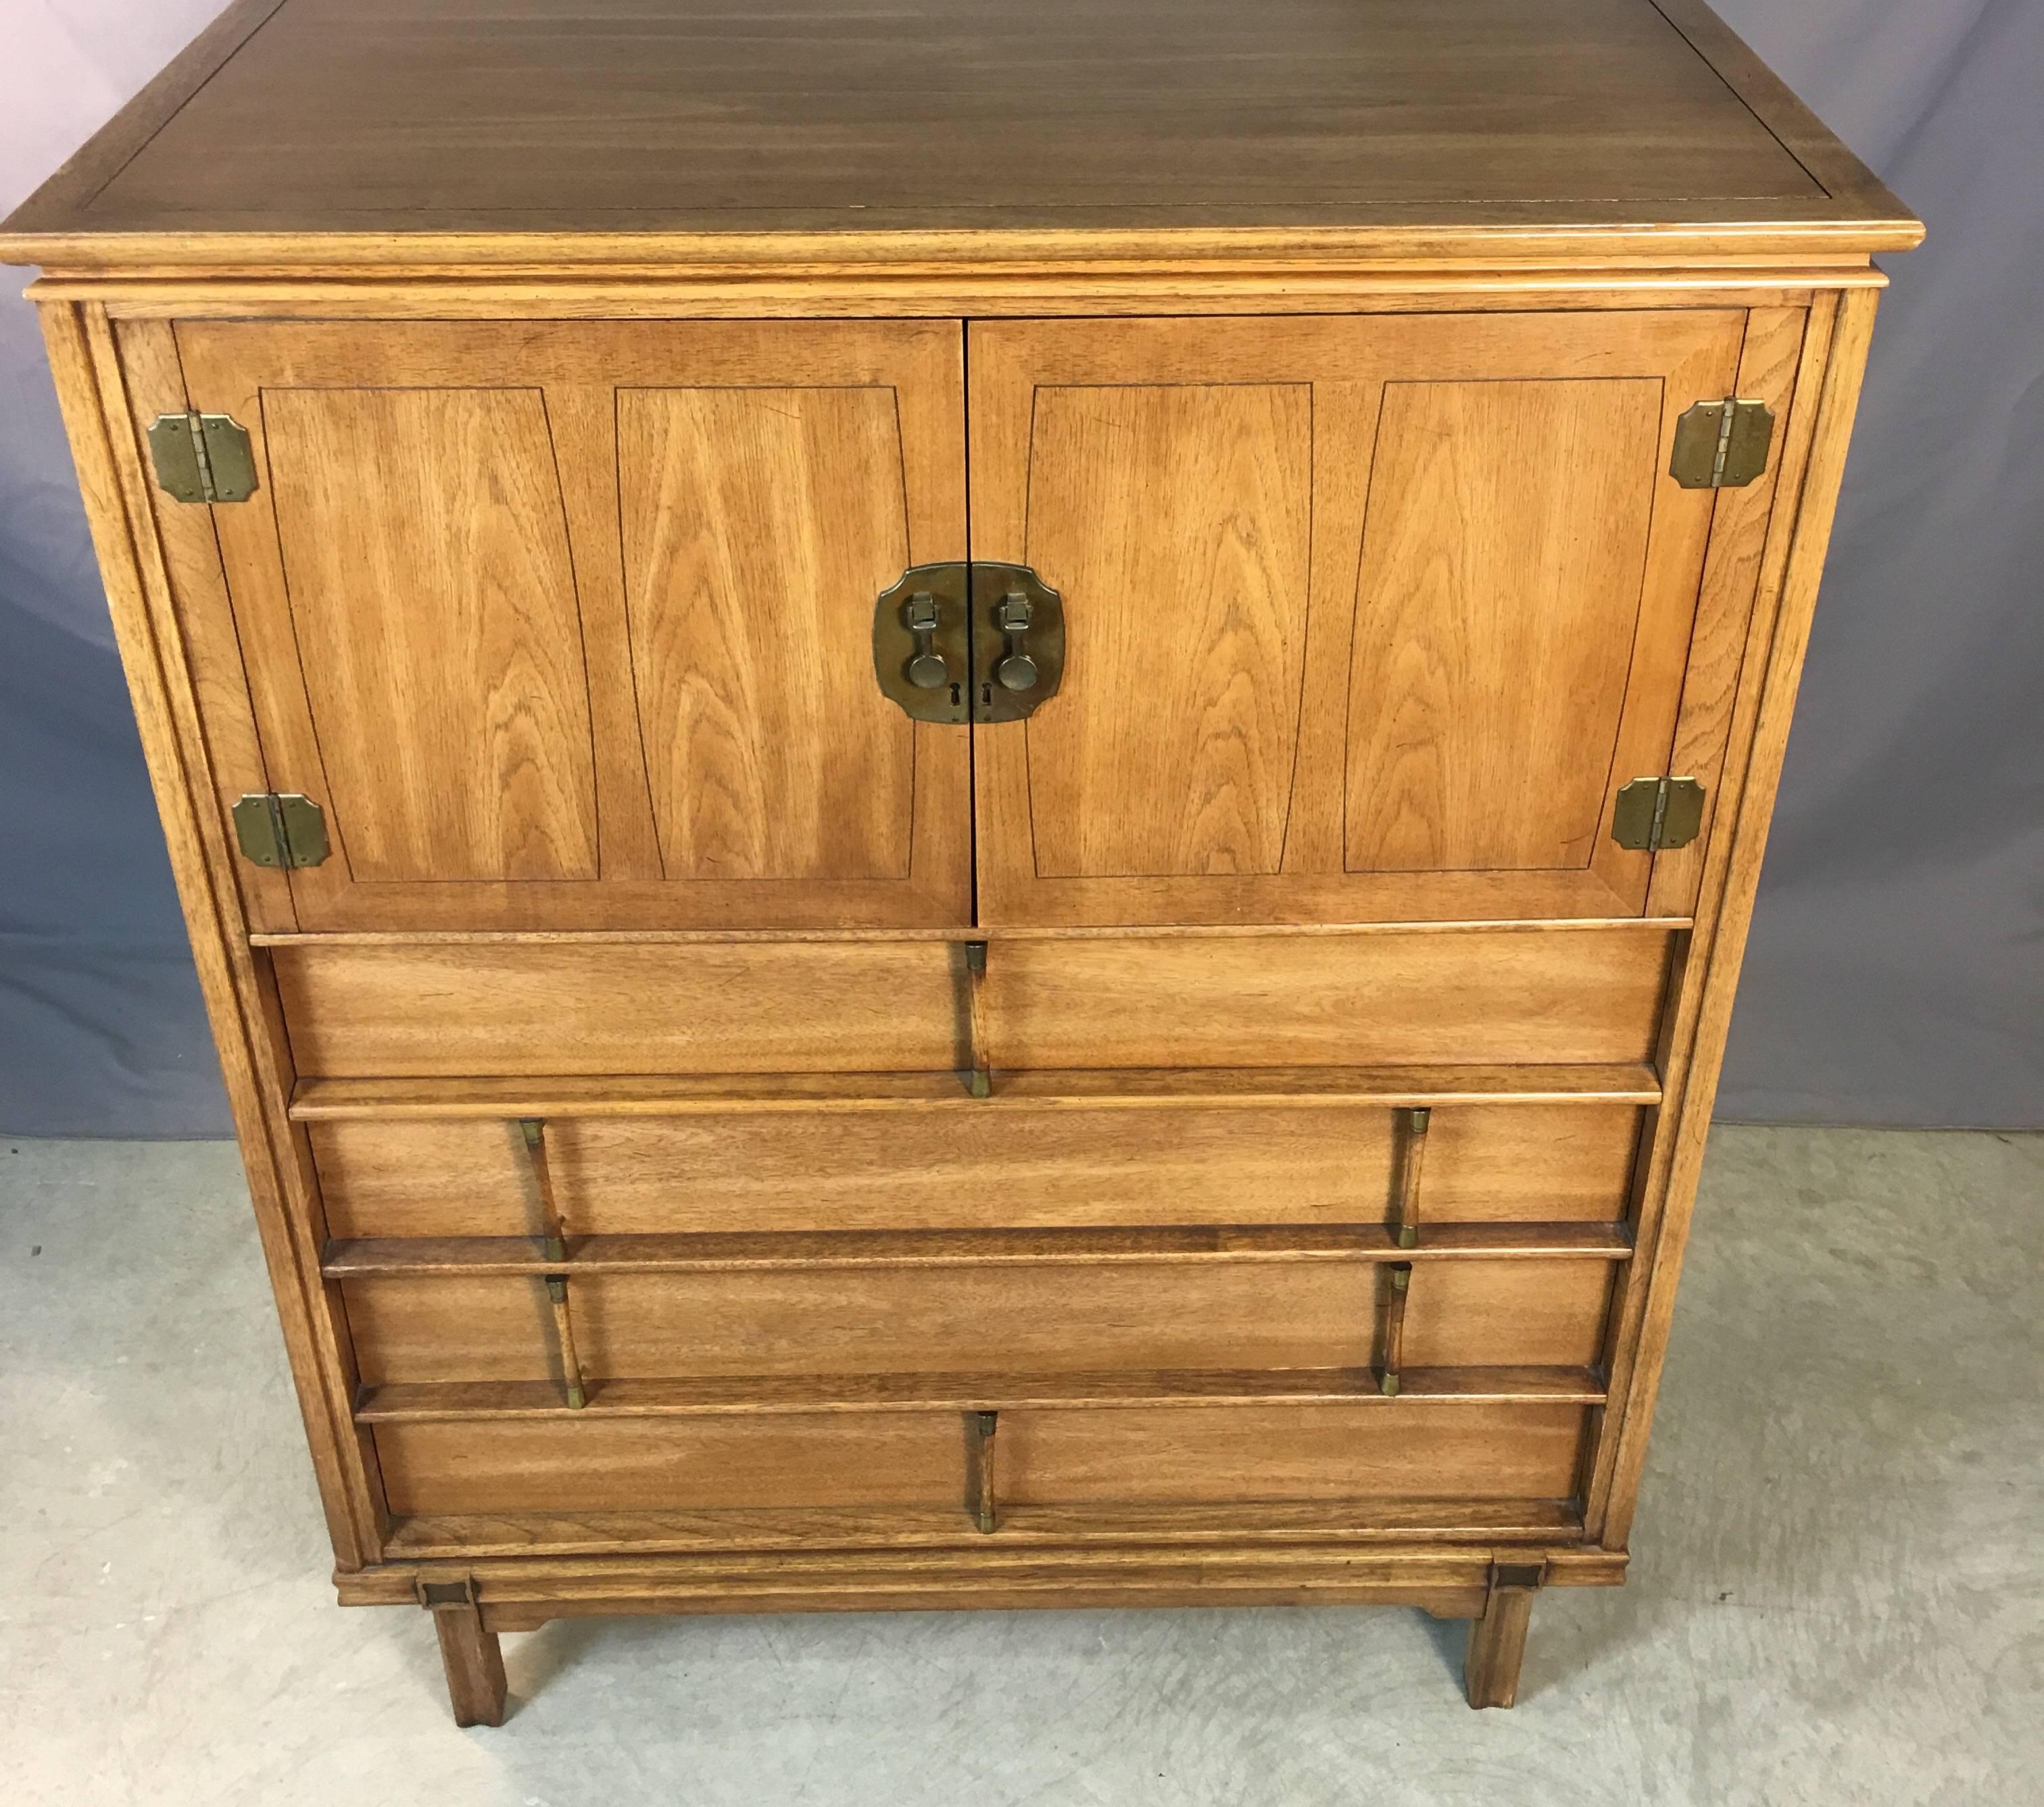 Mid-Century Modern, 1960s Asian-style solid mahogany five drawer tall highboy dresser with brass accented pulls. The dresser has three drawers on the bottom and two more behind the doors. Excellent used condition. No marks.